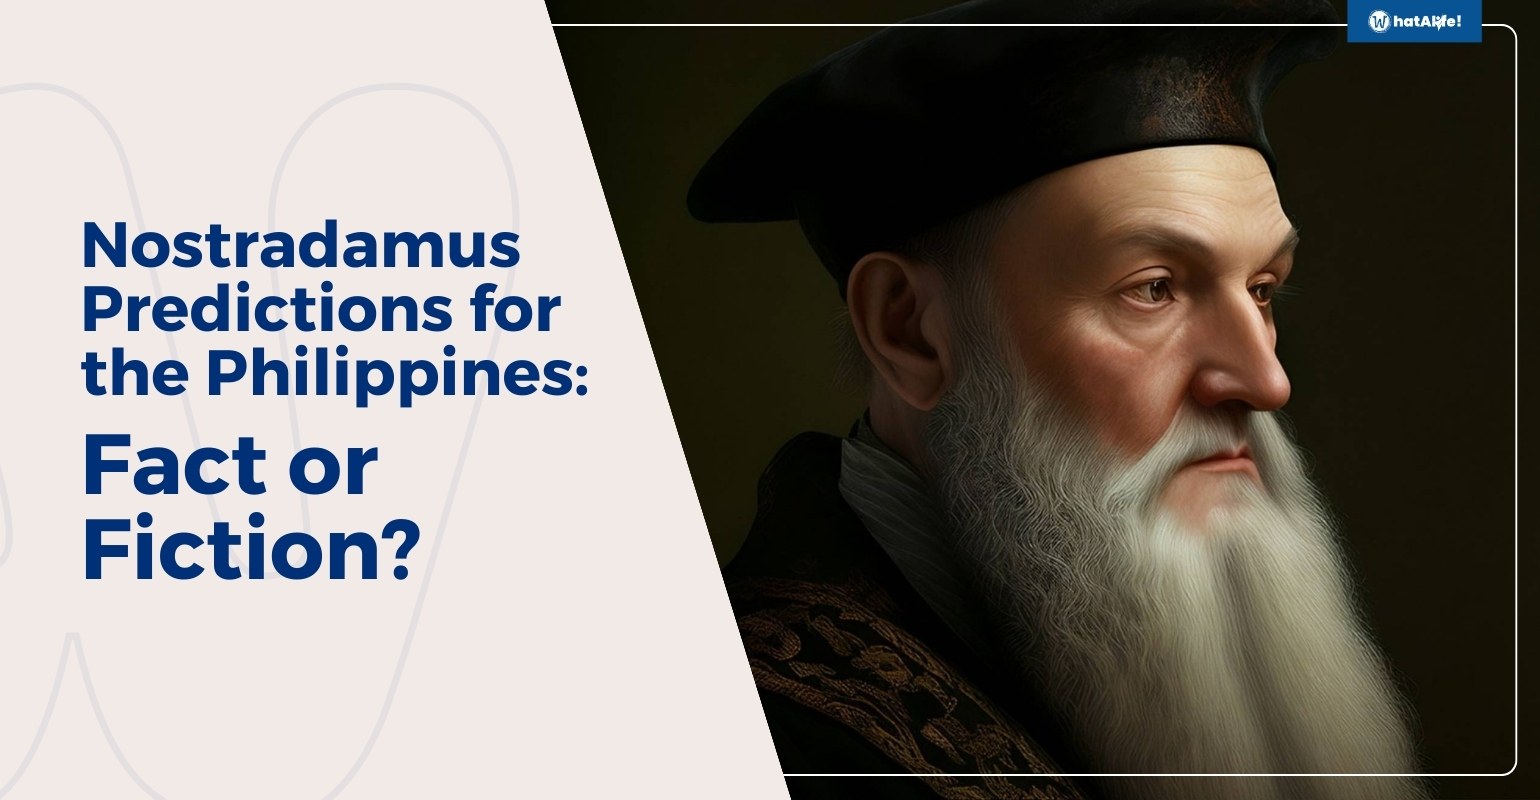 Nostradamus Predictions for the Philippines: Fact or Fiction?